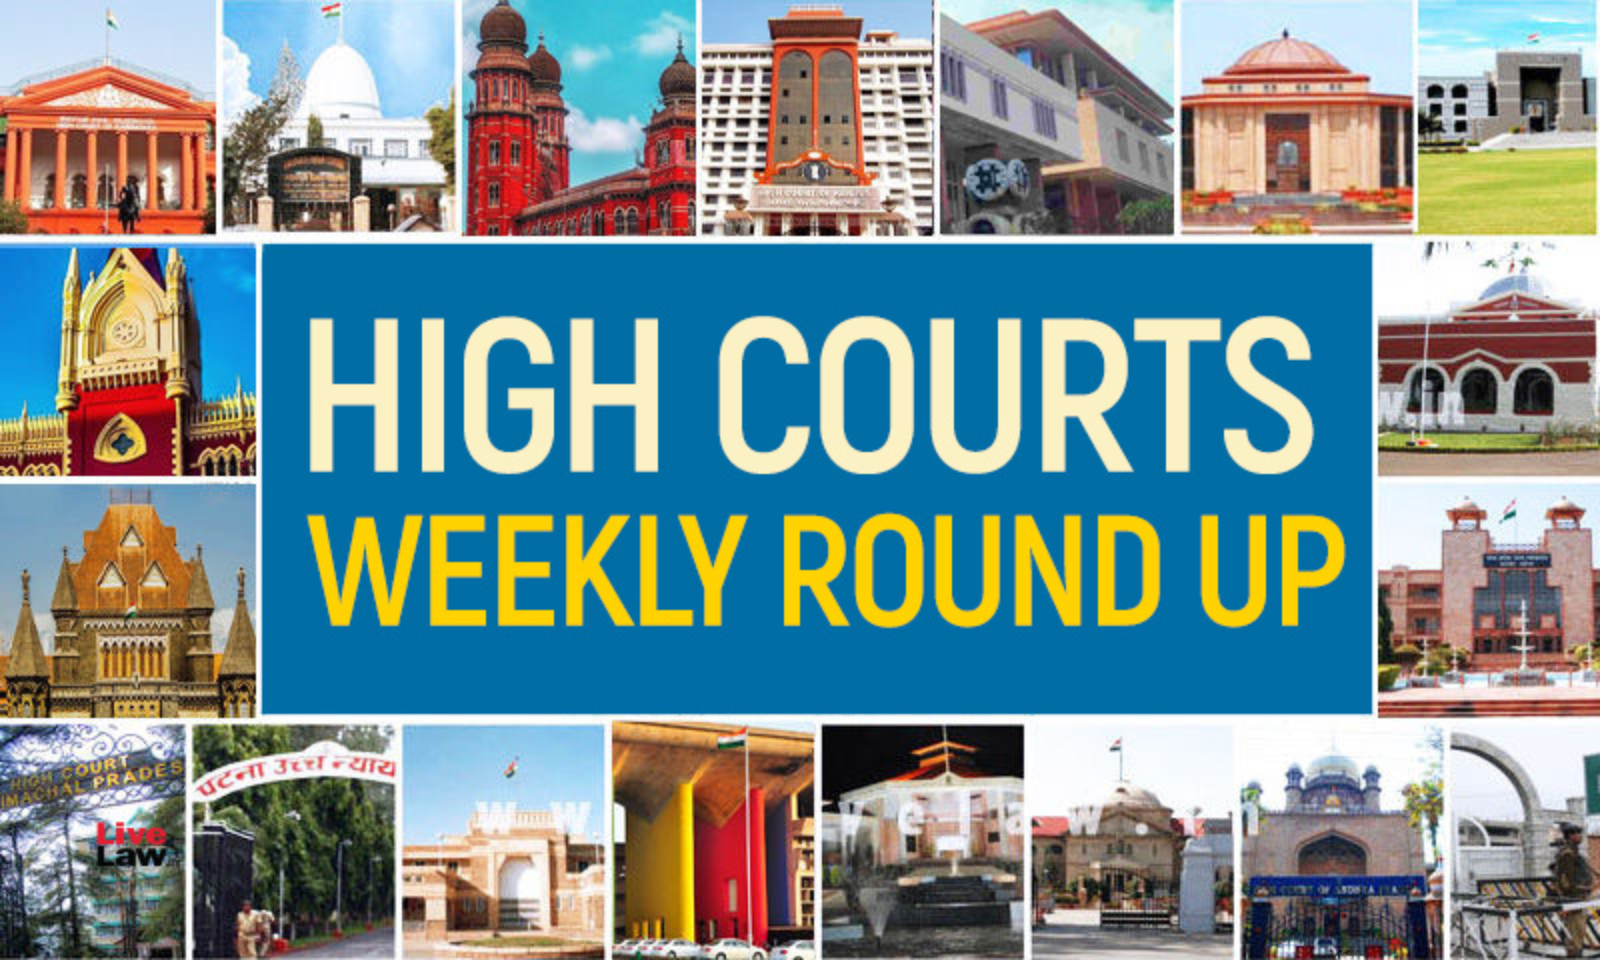 All High Courts Weekly Round-Up (June 06, 2022 - June 12, 2022)